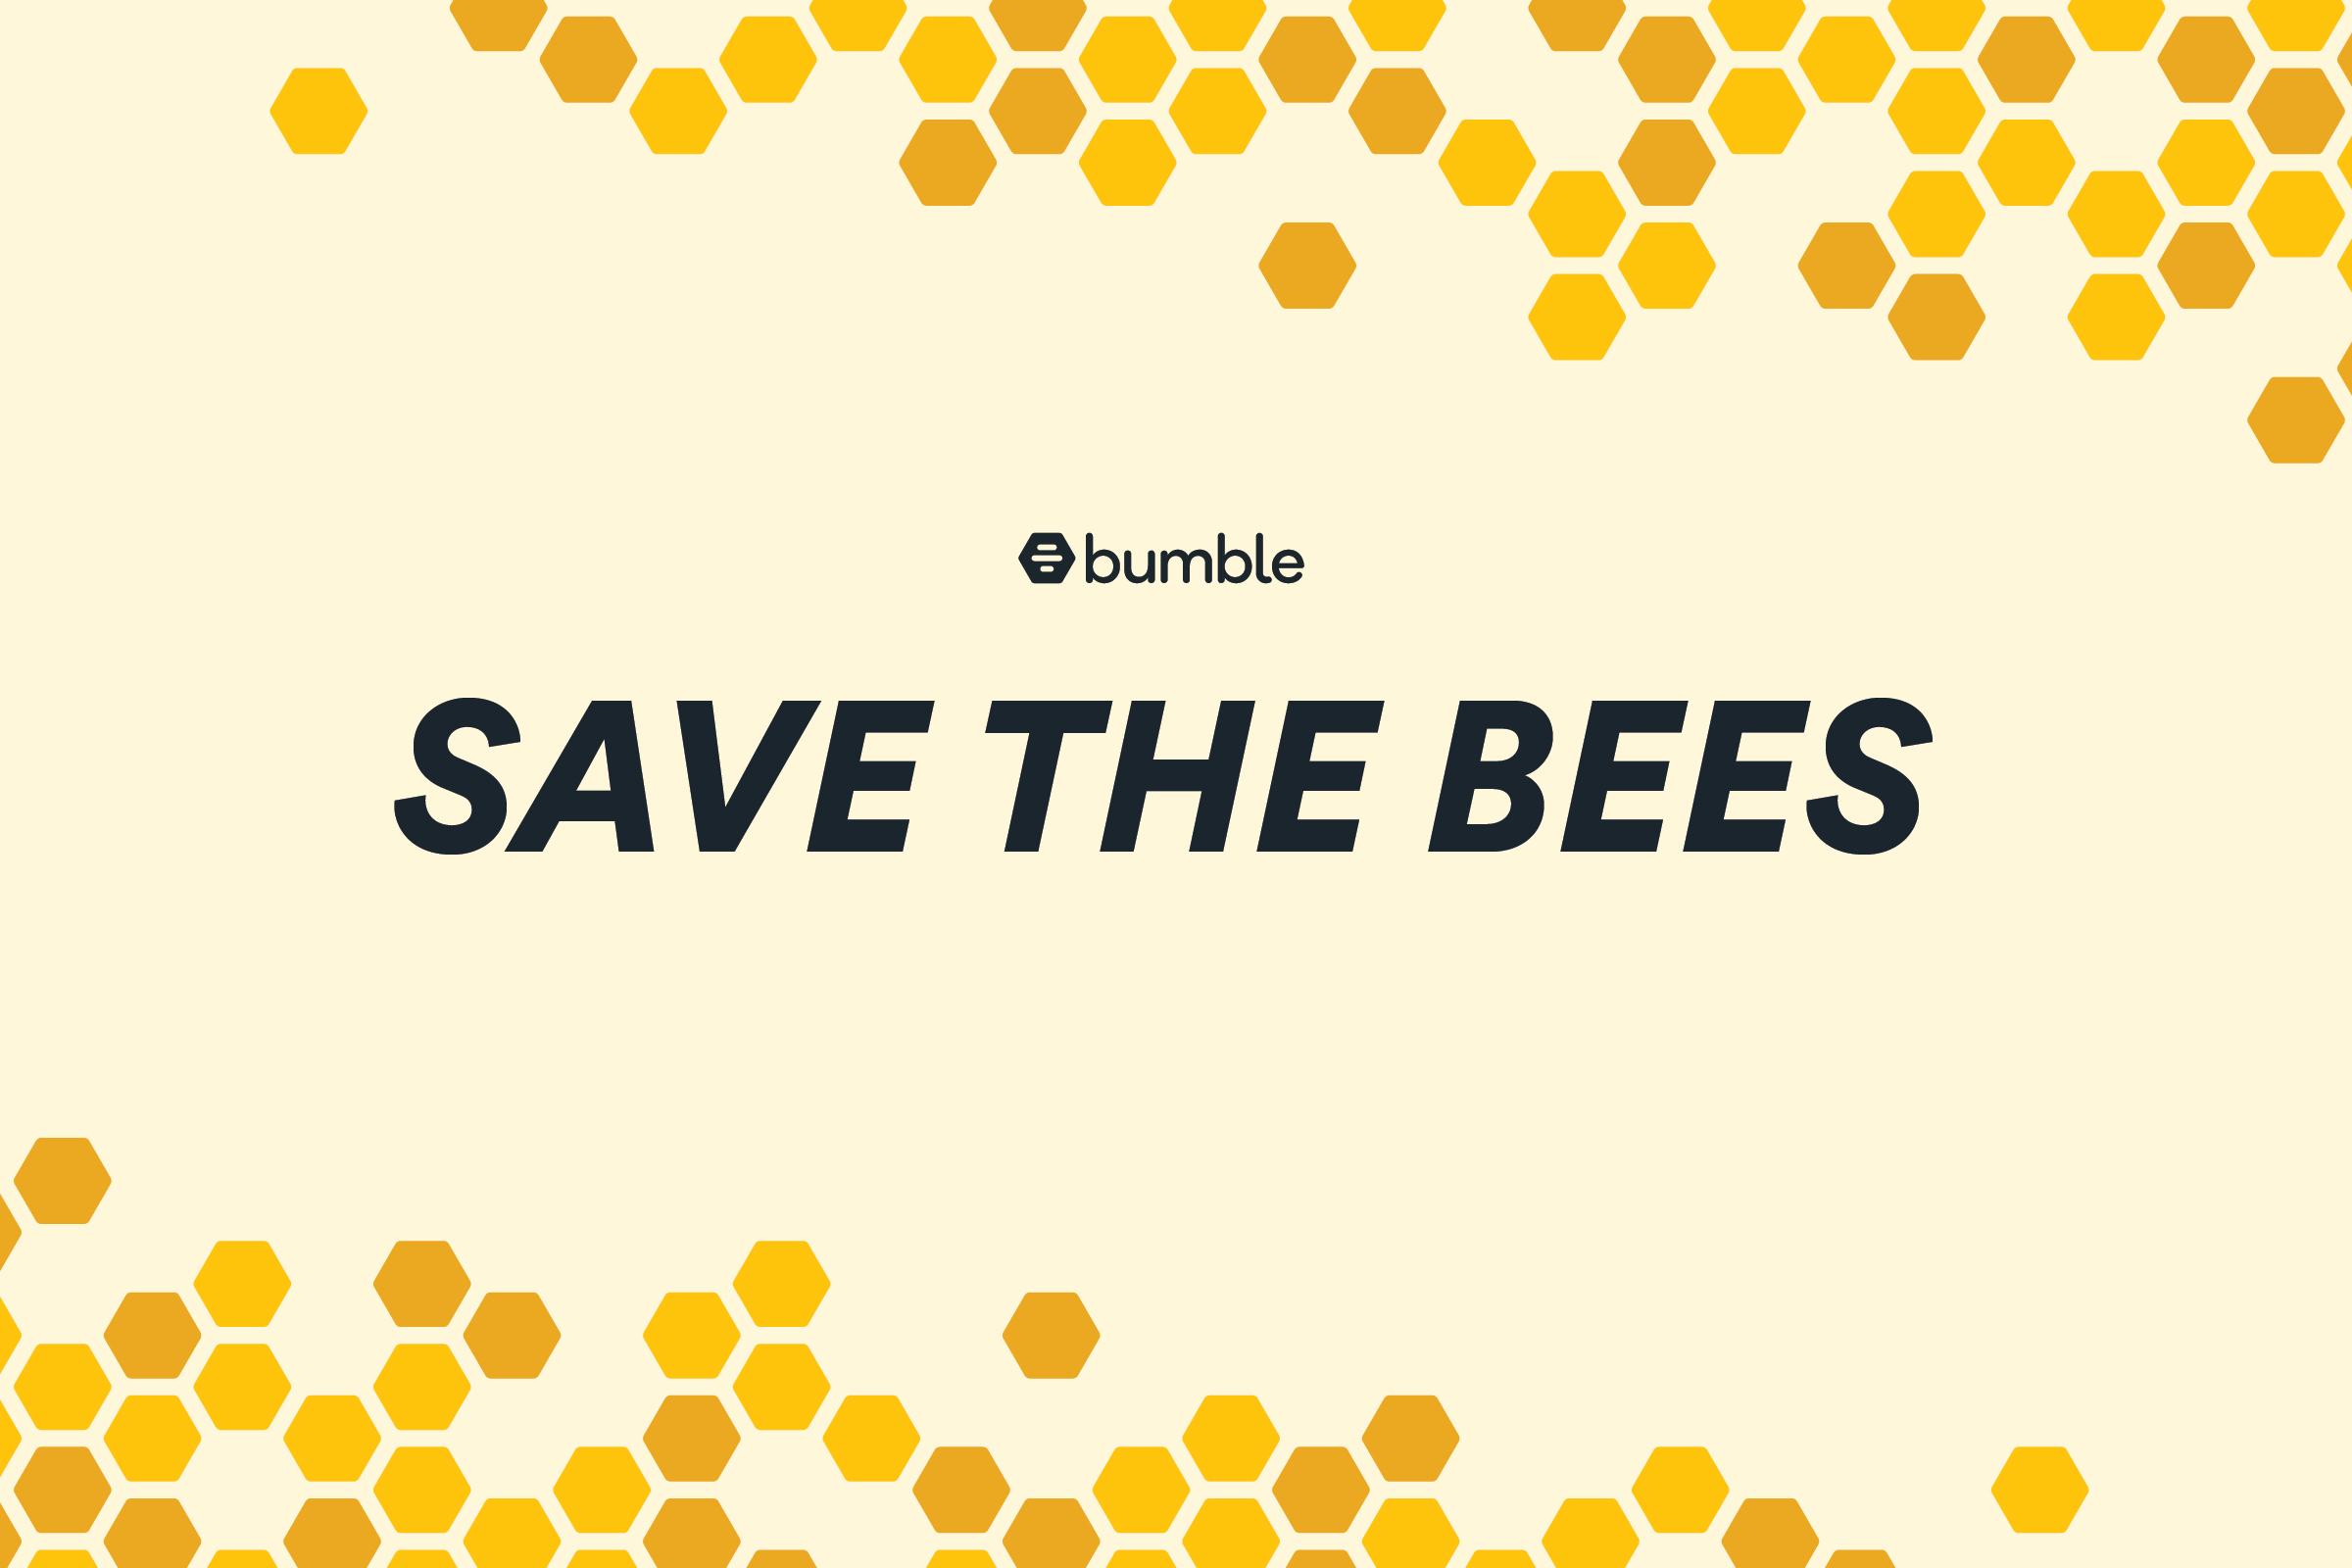 Bumble and the National Geographic Society Are Teaming Up to Save the Bees